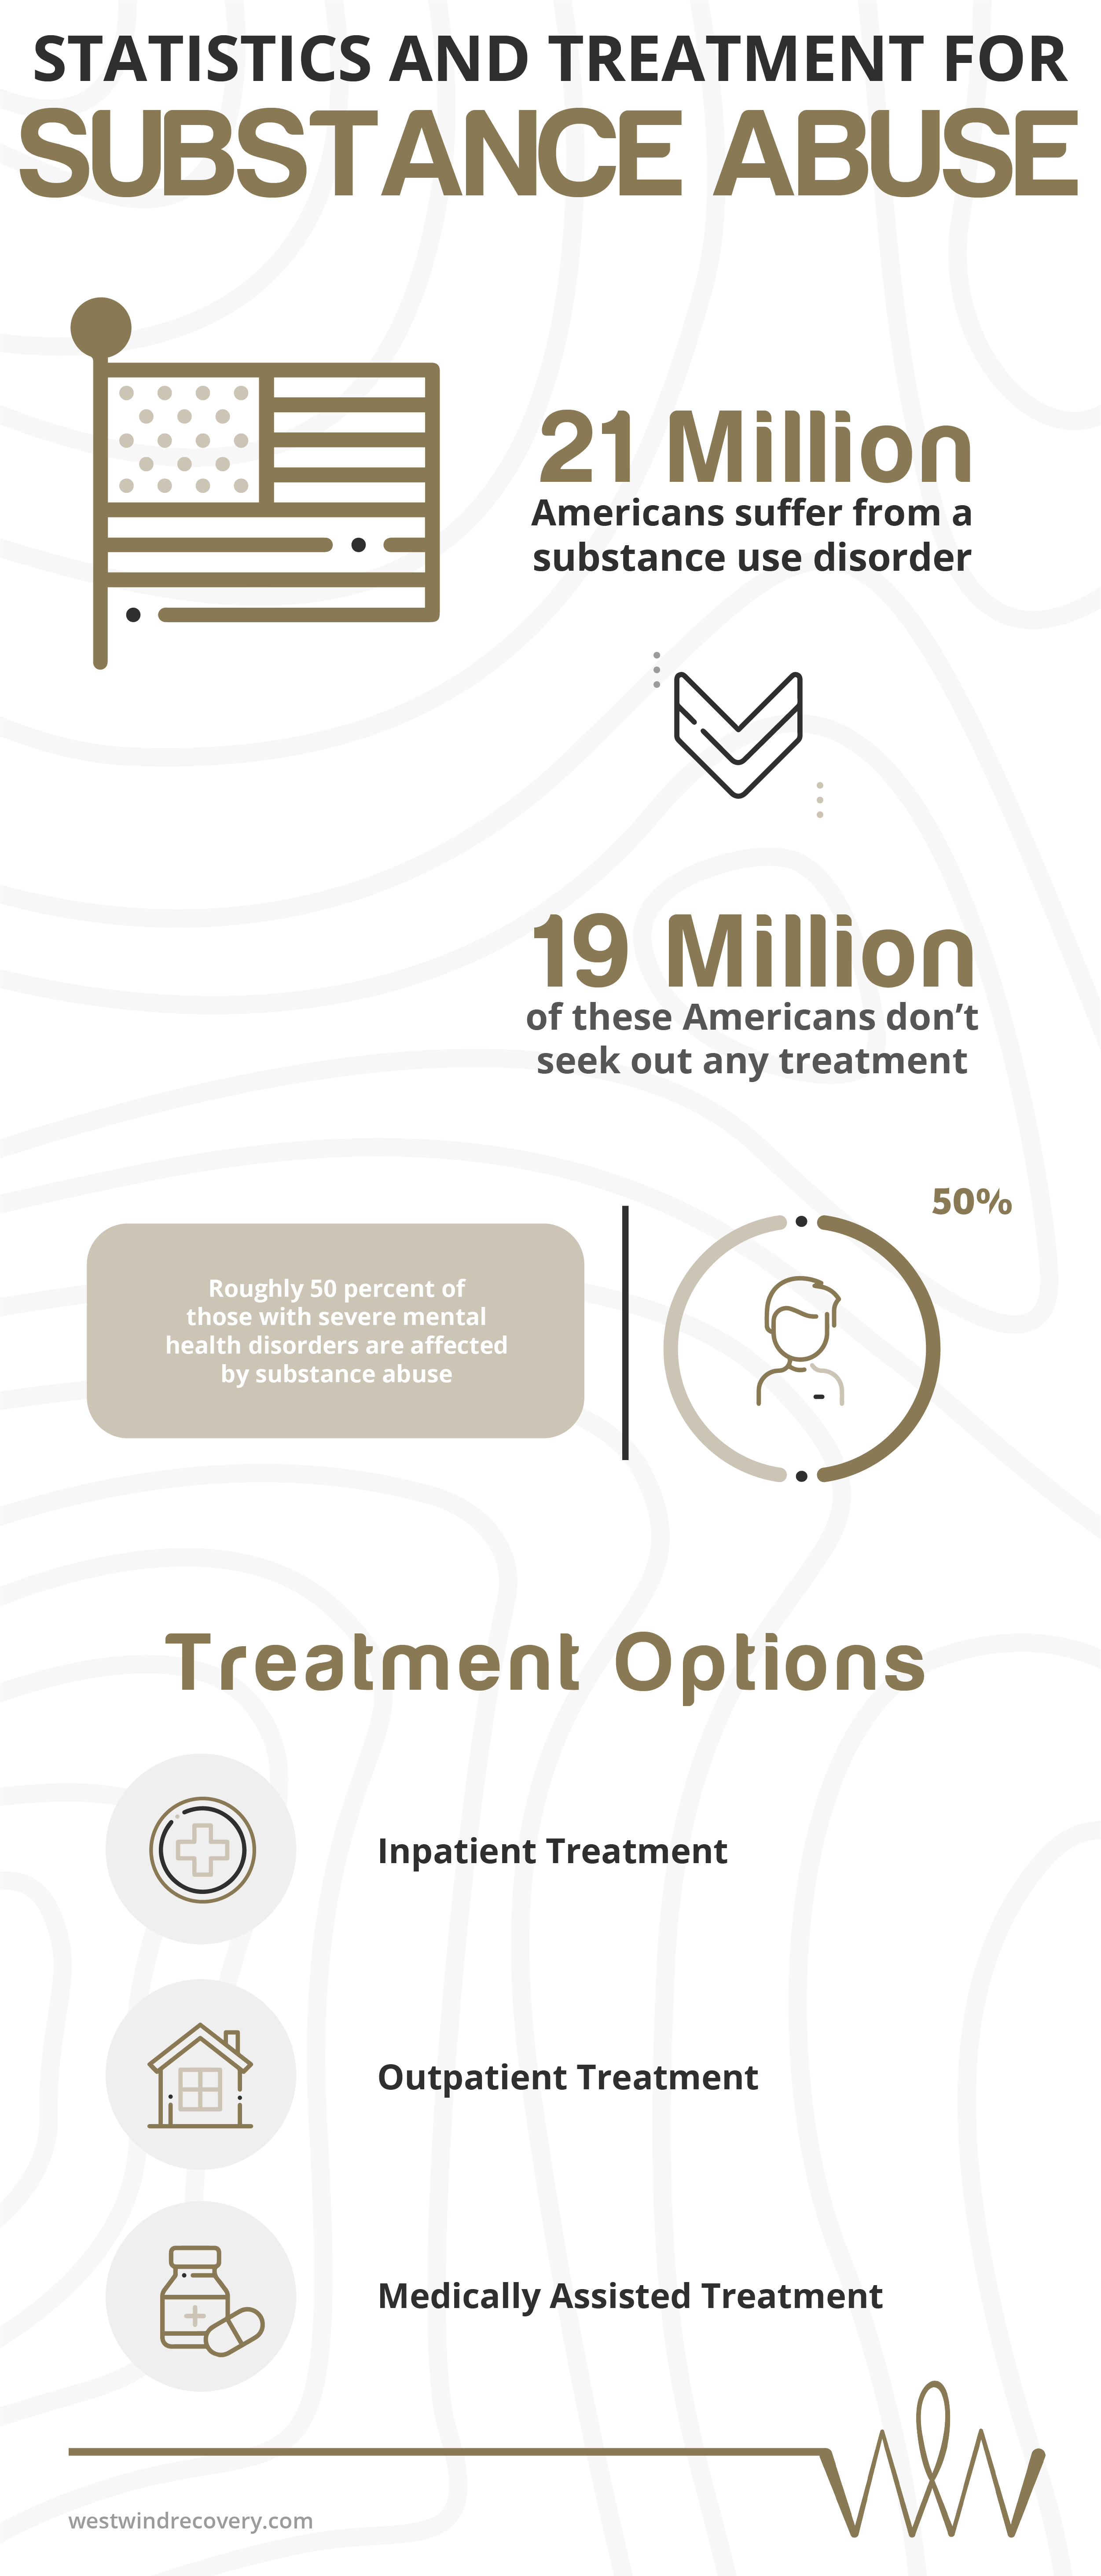 Statistic and Treatment for Substance Abuse